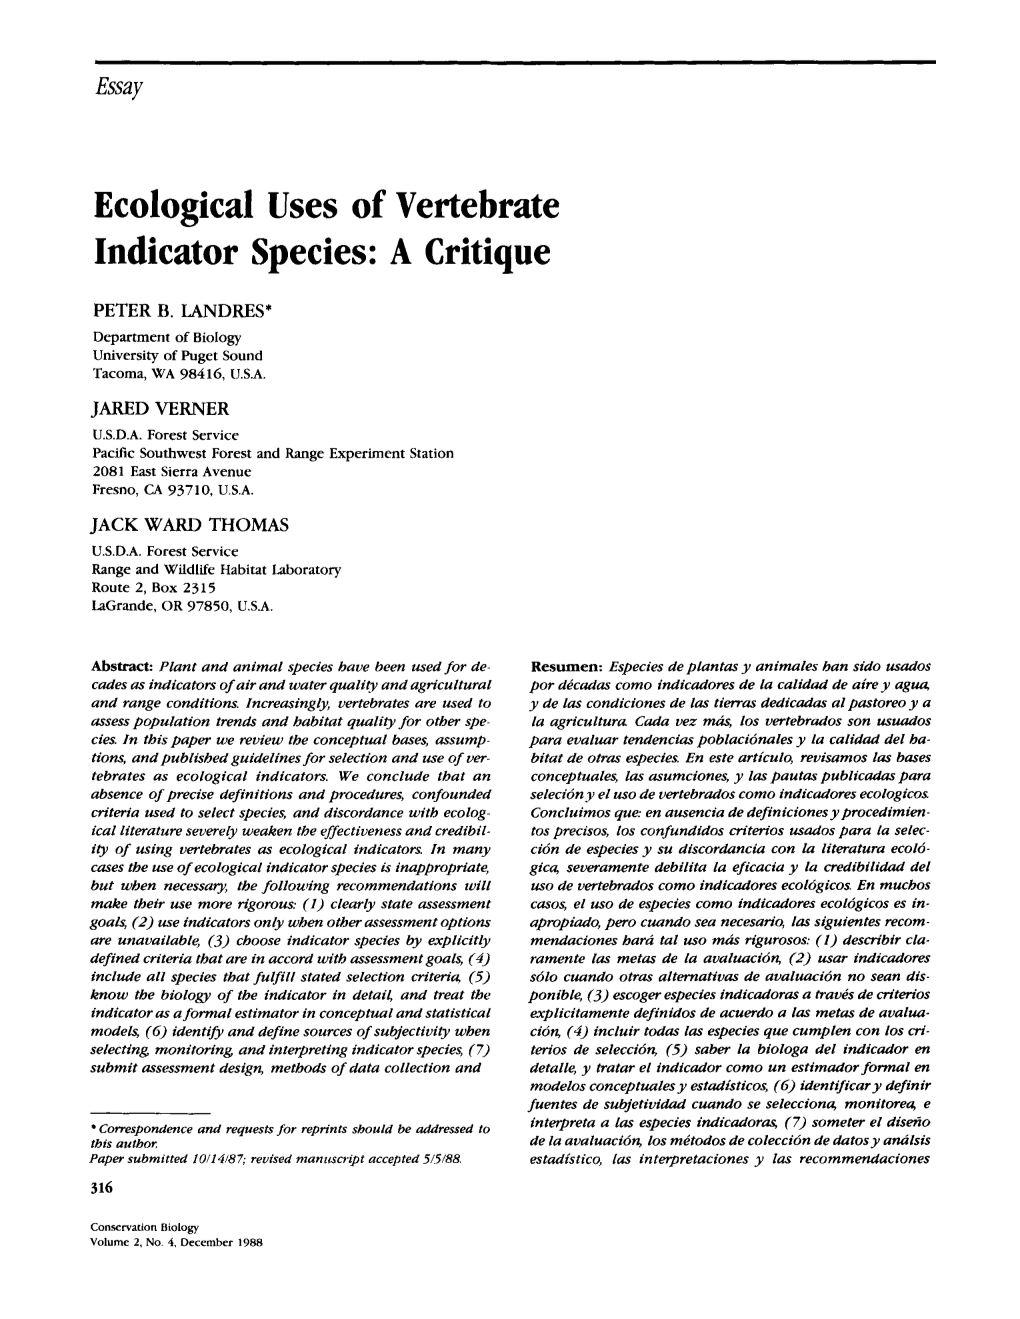 Ecological Uses of Vertebrate Indicator Species: a Critique